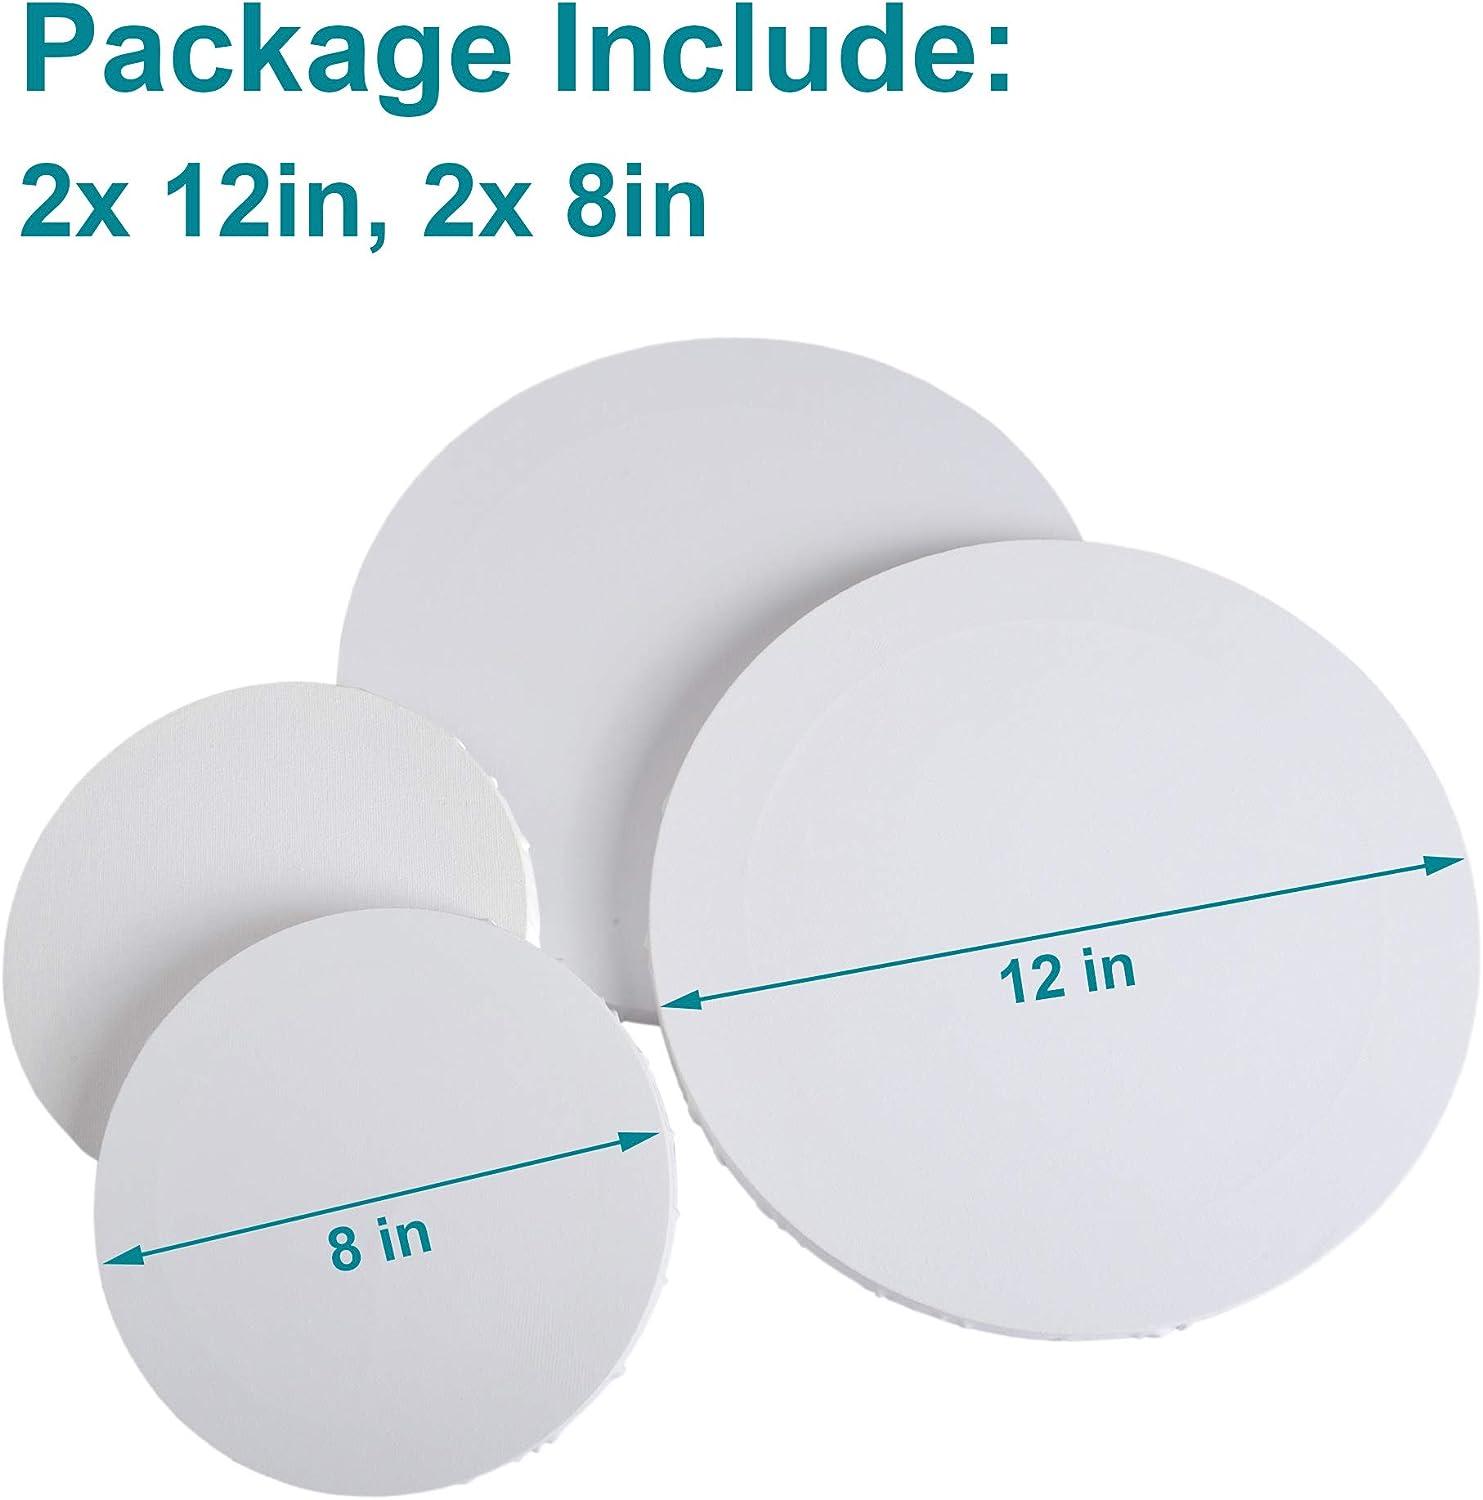  Round Canvas, 8 Pack Circle Canvases for Painting, Pre  Stretched Round Canvases, Circle Art Canvases Panels for Acrylic Painting,  Pouring, Oil Paint - Included 4pcs 12x12'', 4pcs 8x8'' Round Canvases